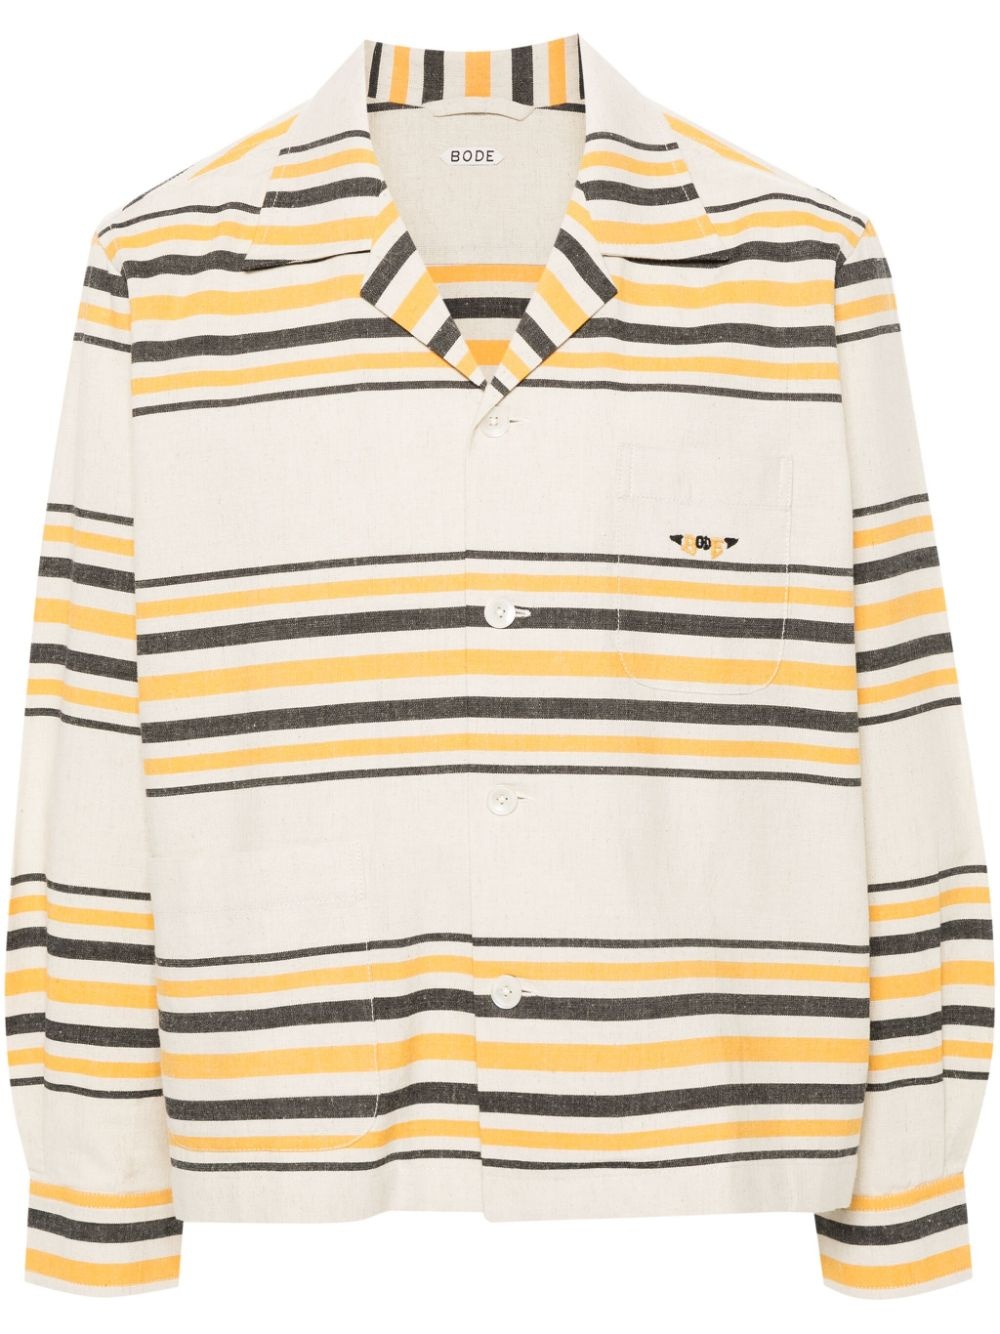 embroidered-logo striped shirt - 1